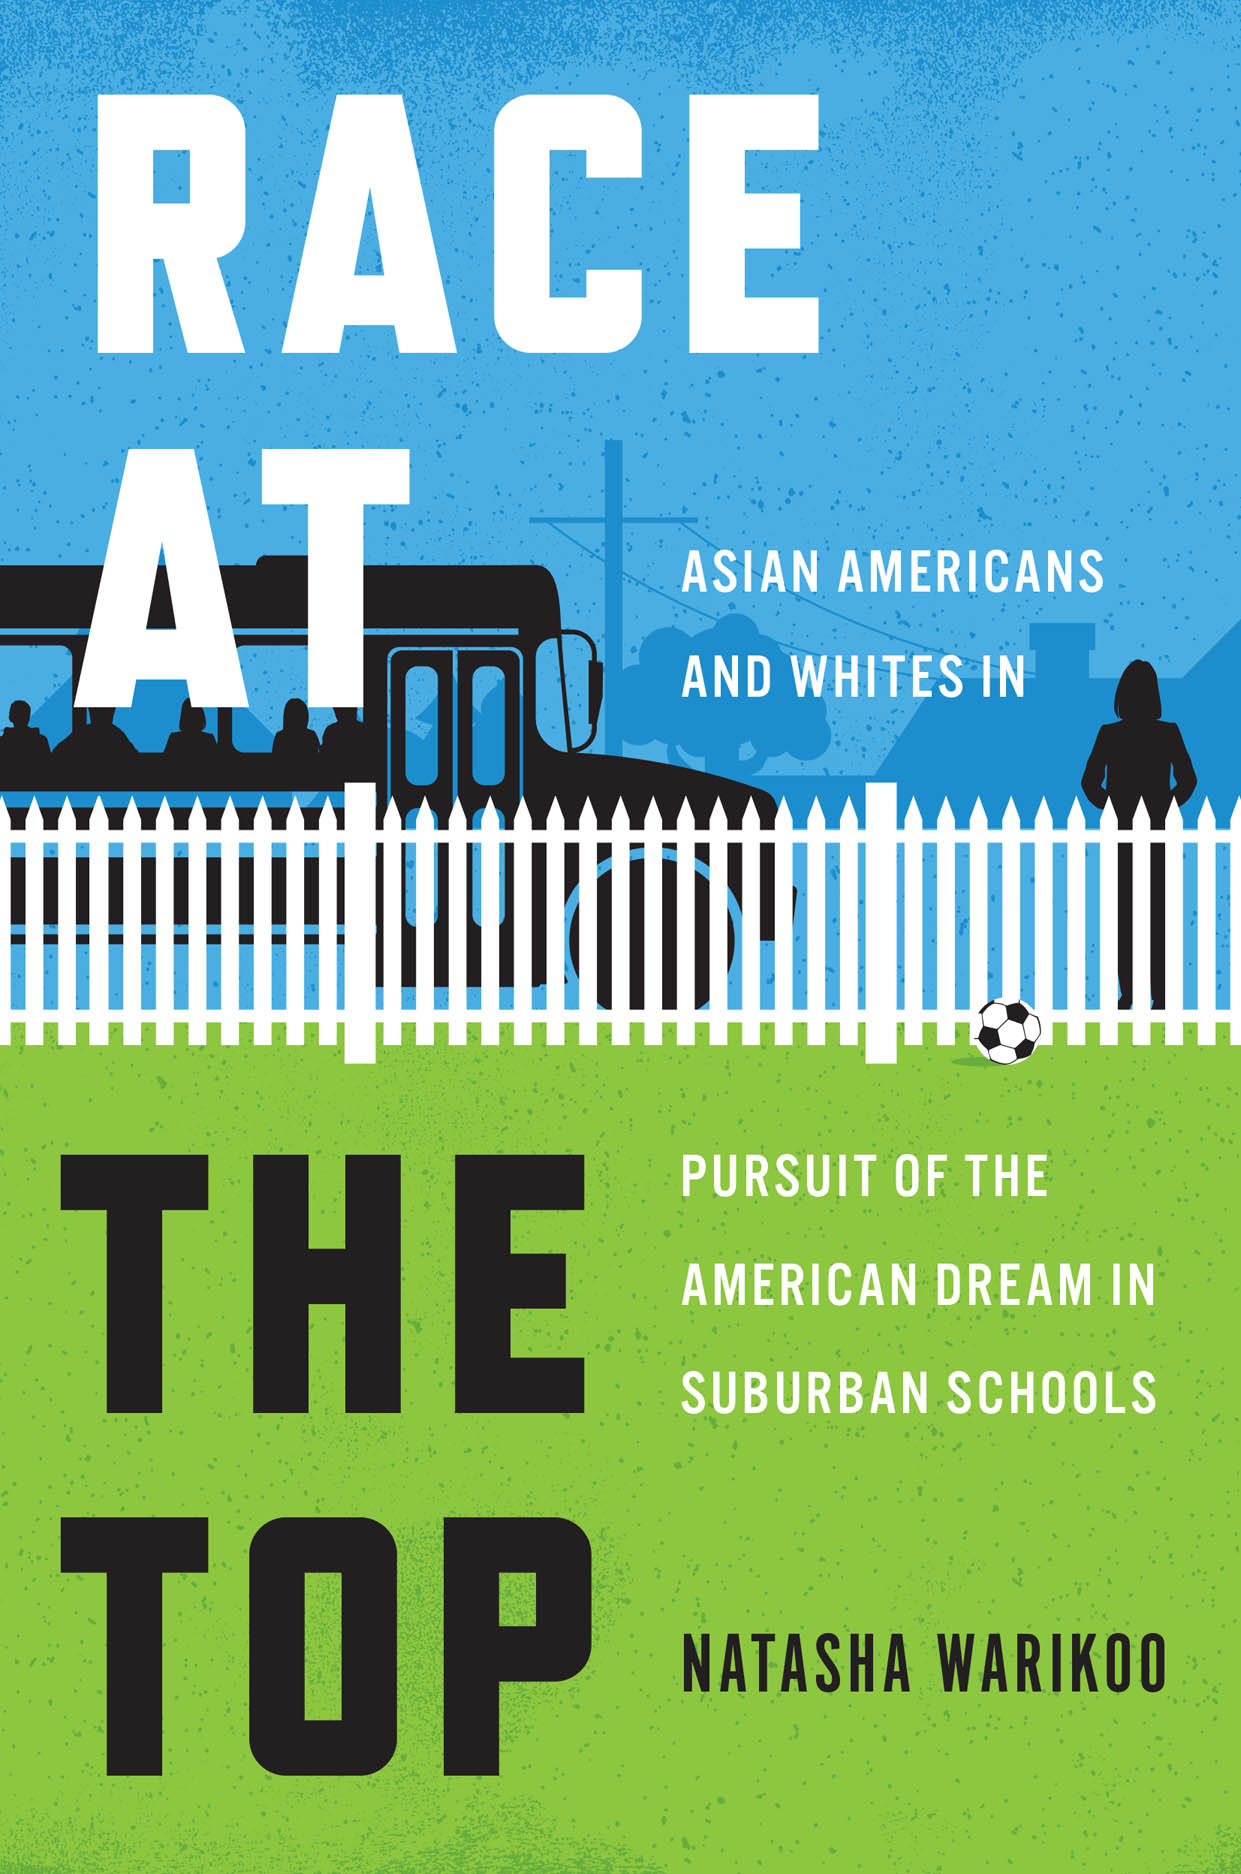 Race at the Asian Americans and in Pursuit of the American Dream in Suburban Schools,